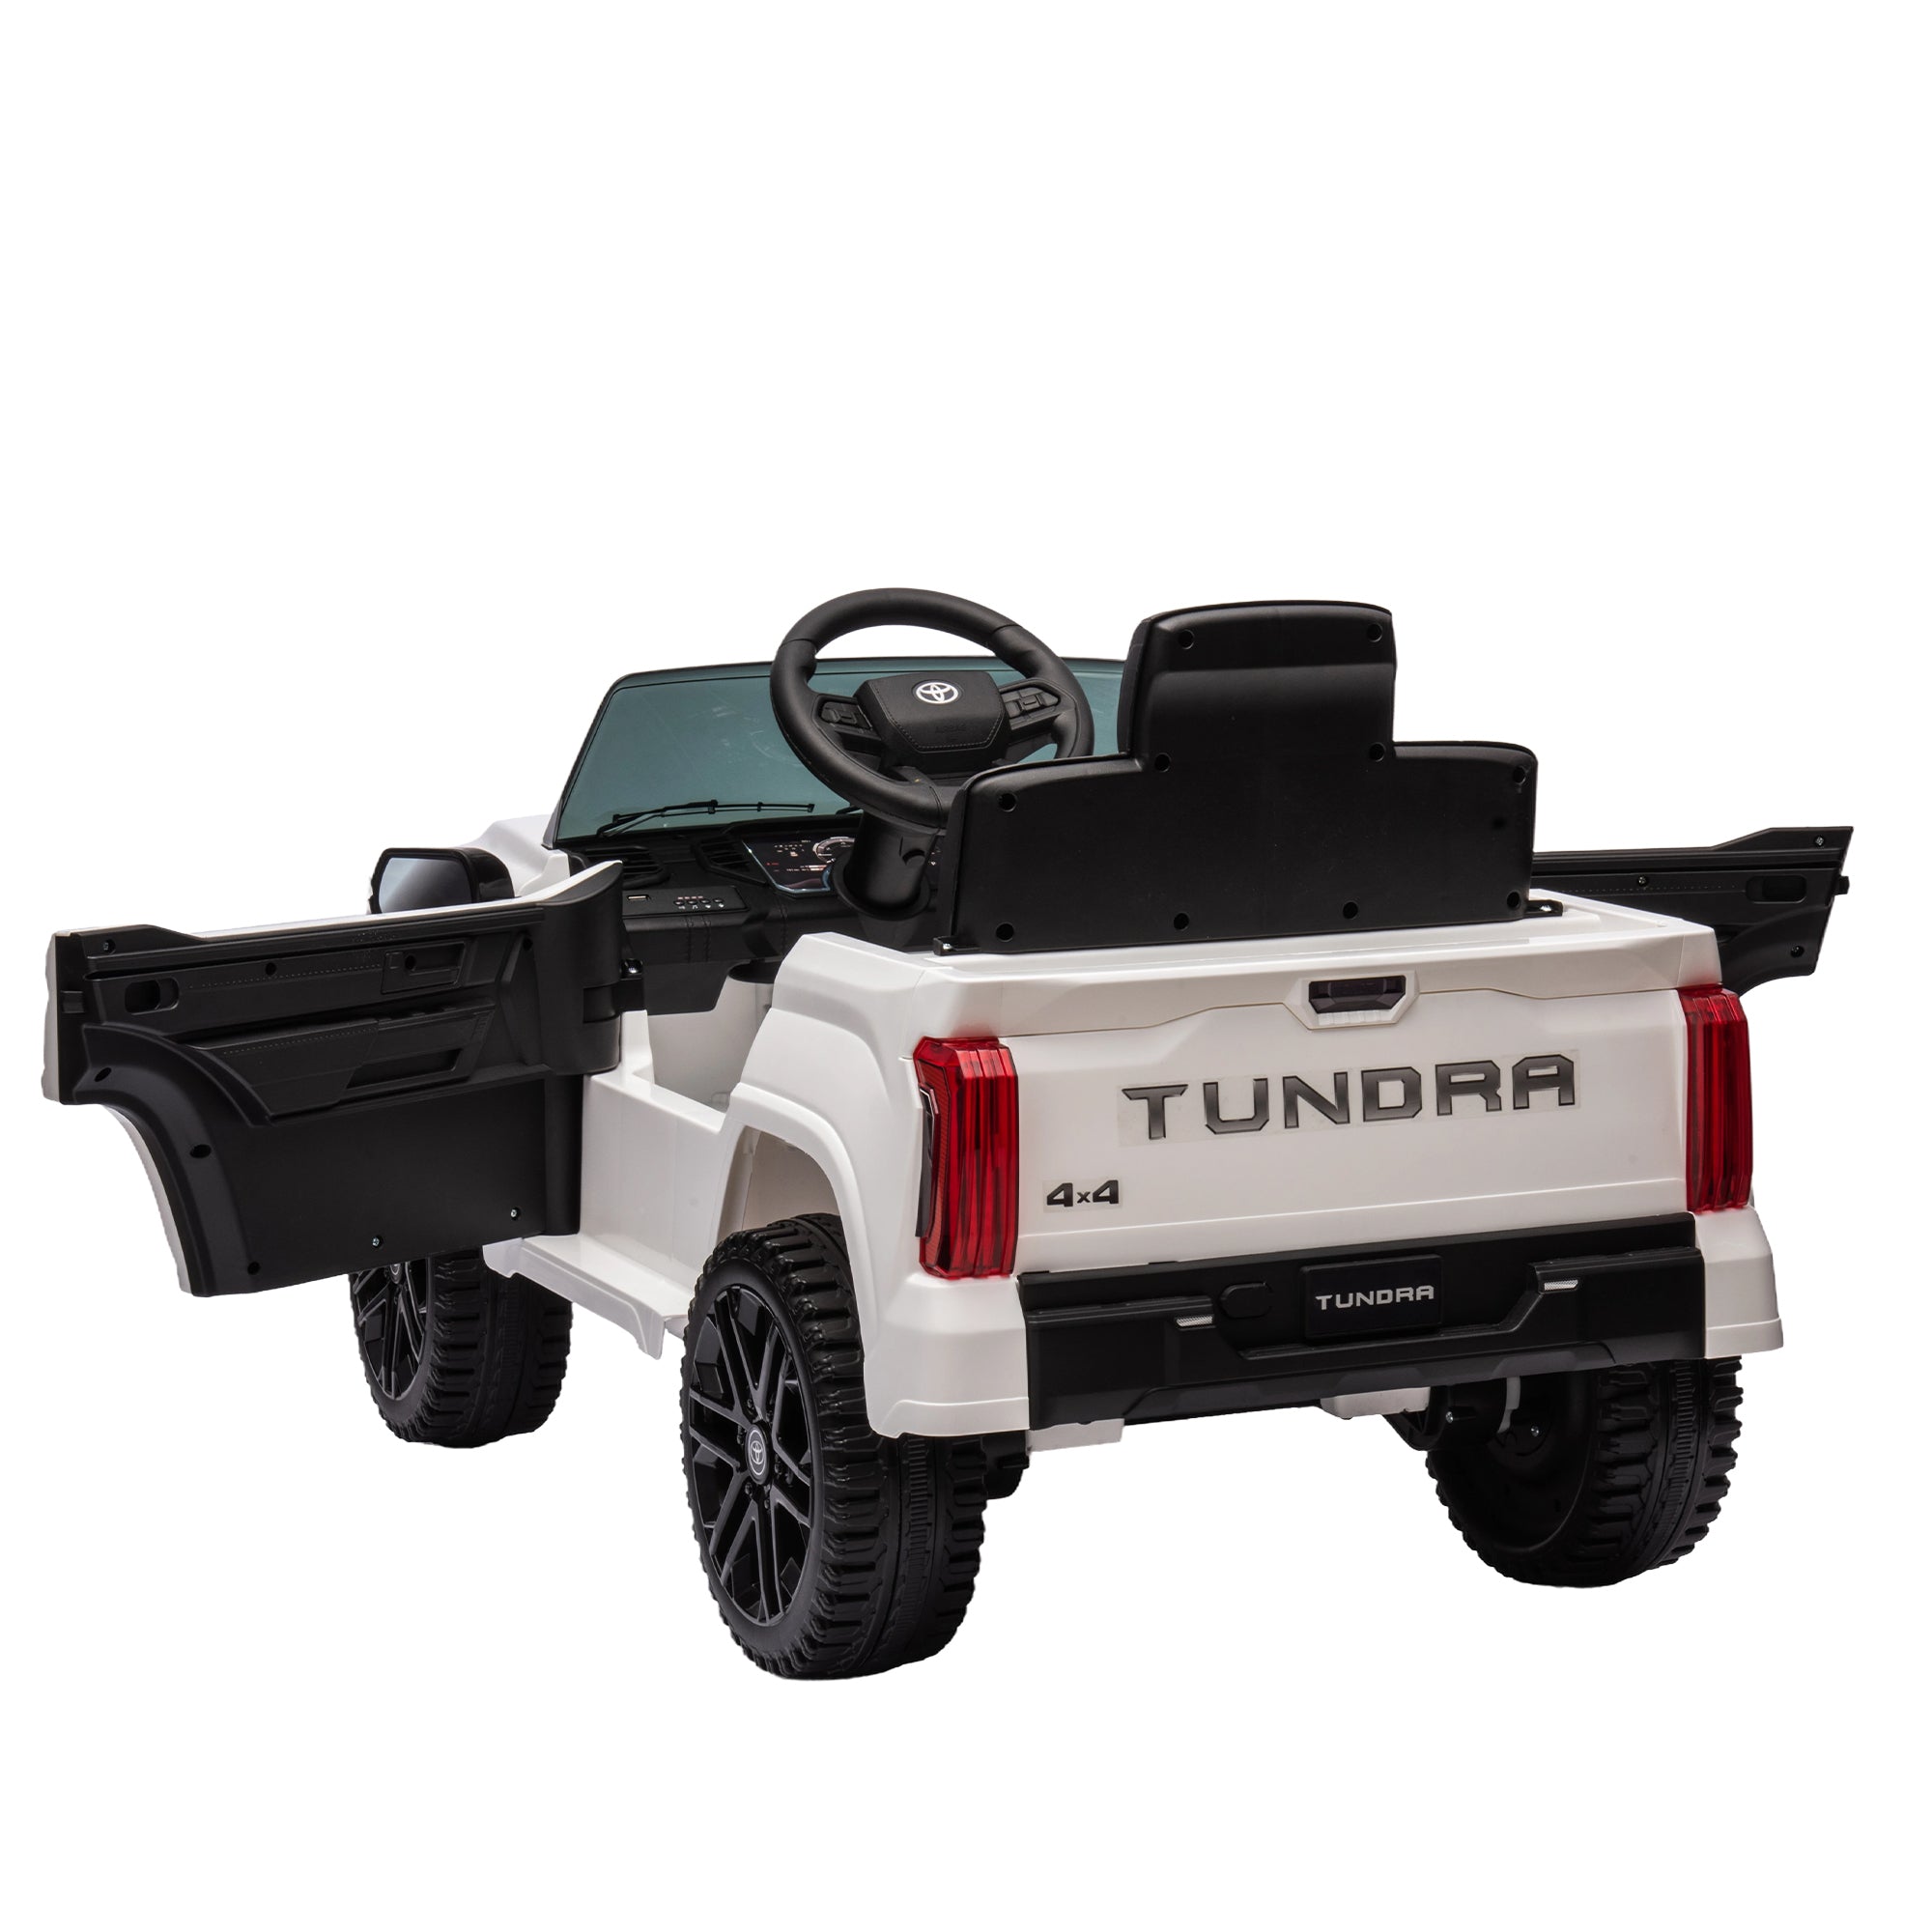 Officially Licensed Toyota Tundra Pickup,electric white-plastic